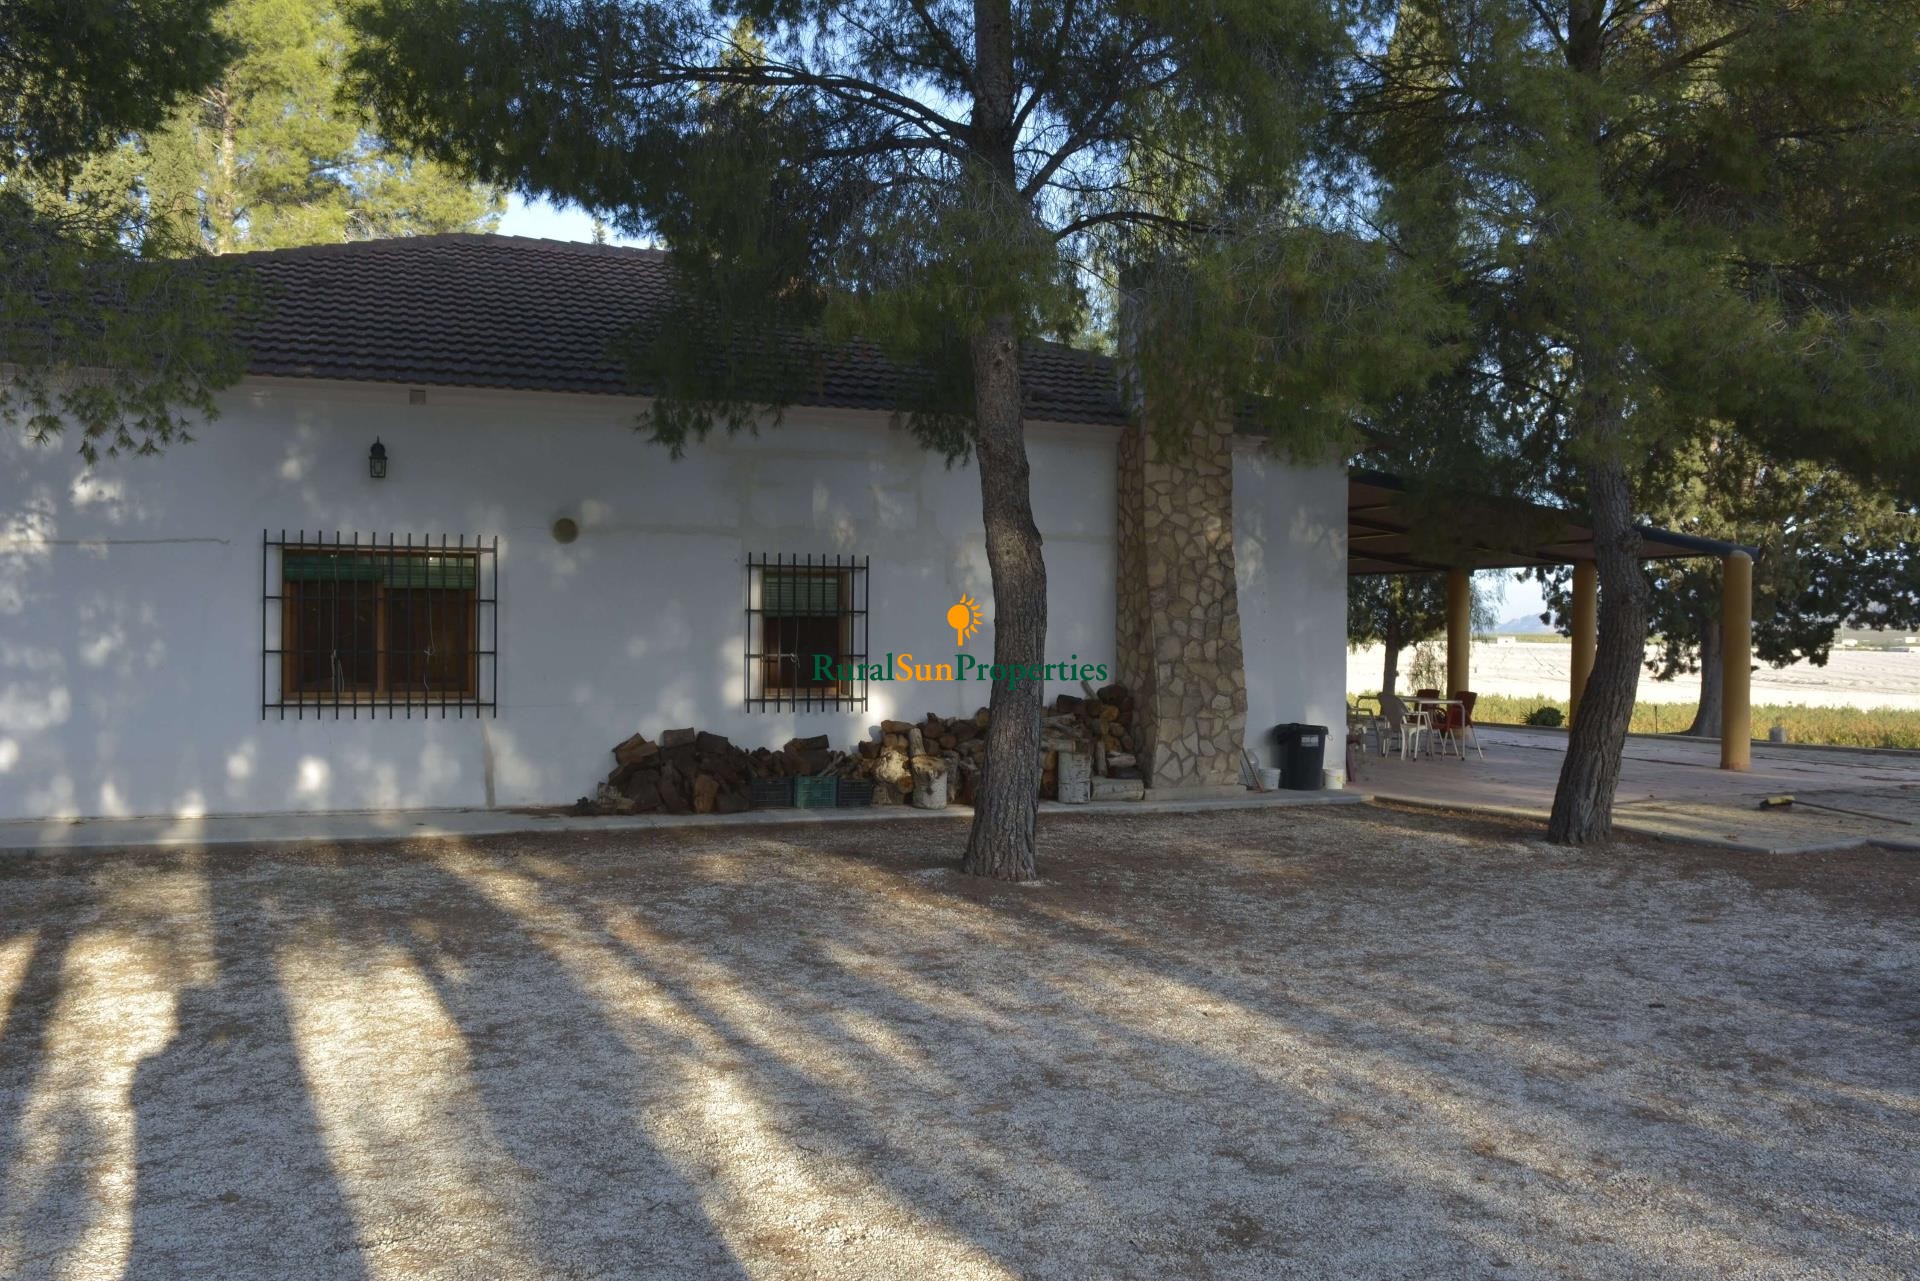 Sale Large country house in Calasparra with 1.800m2 plot and private pool.